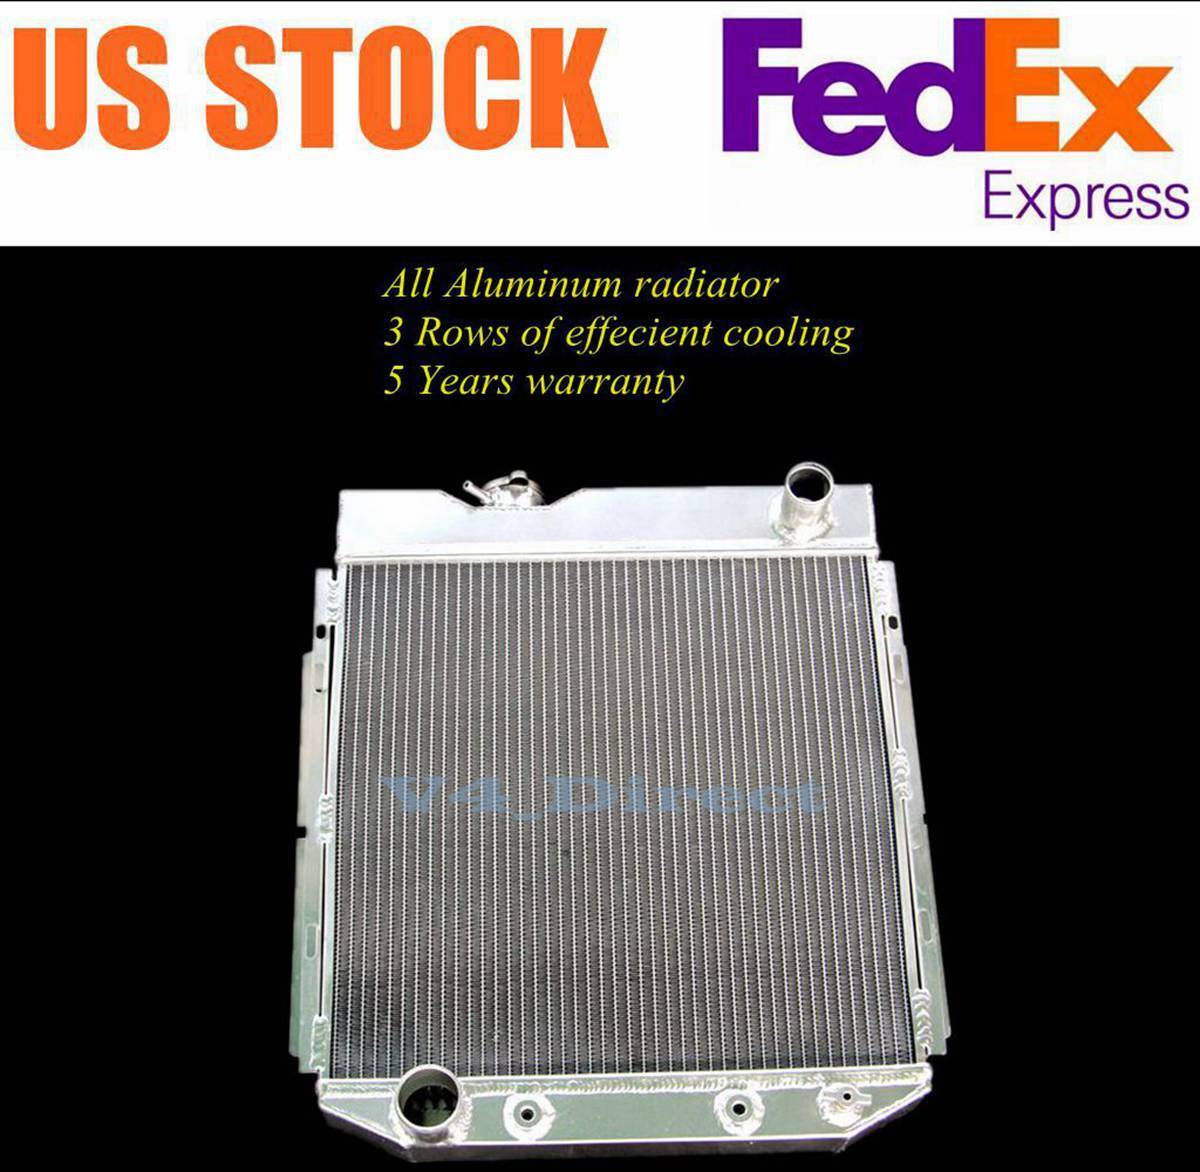 CC251 3 Row Aluminum Radiator For Ford 1965-1966 Mustang 1960-1965 Falcon Comet